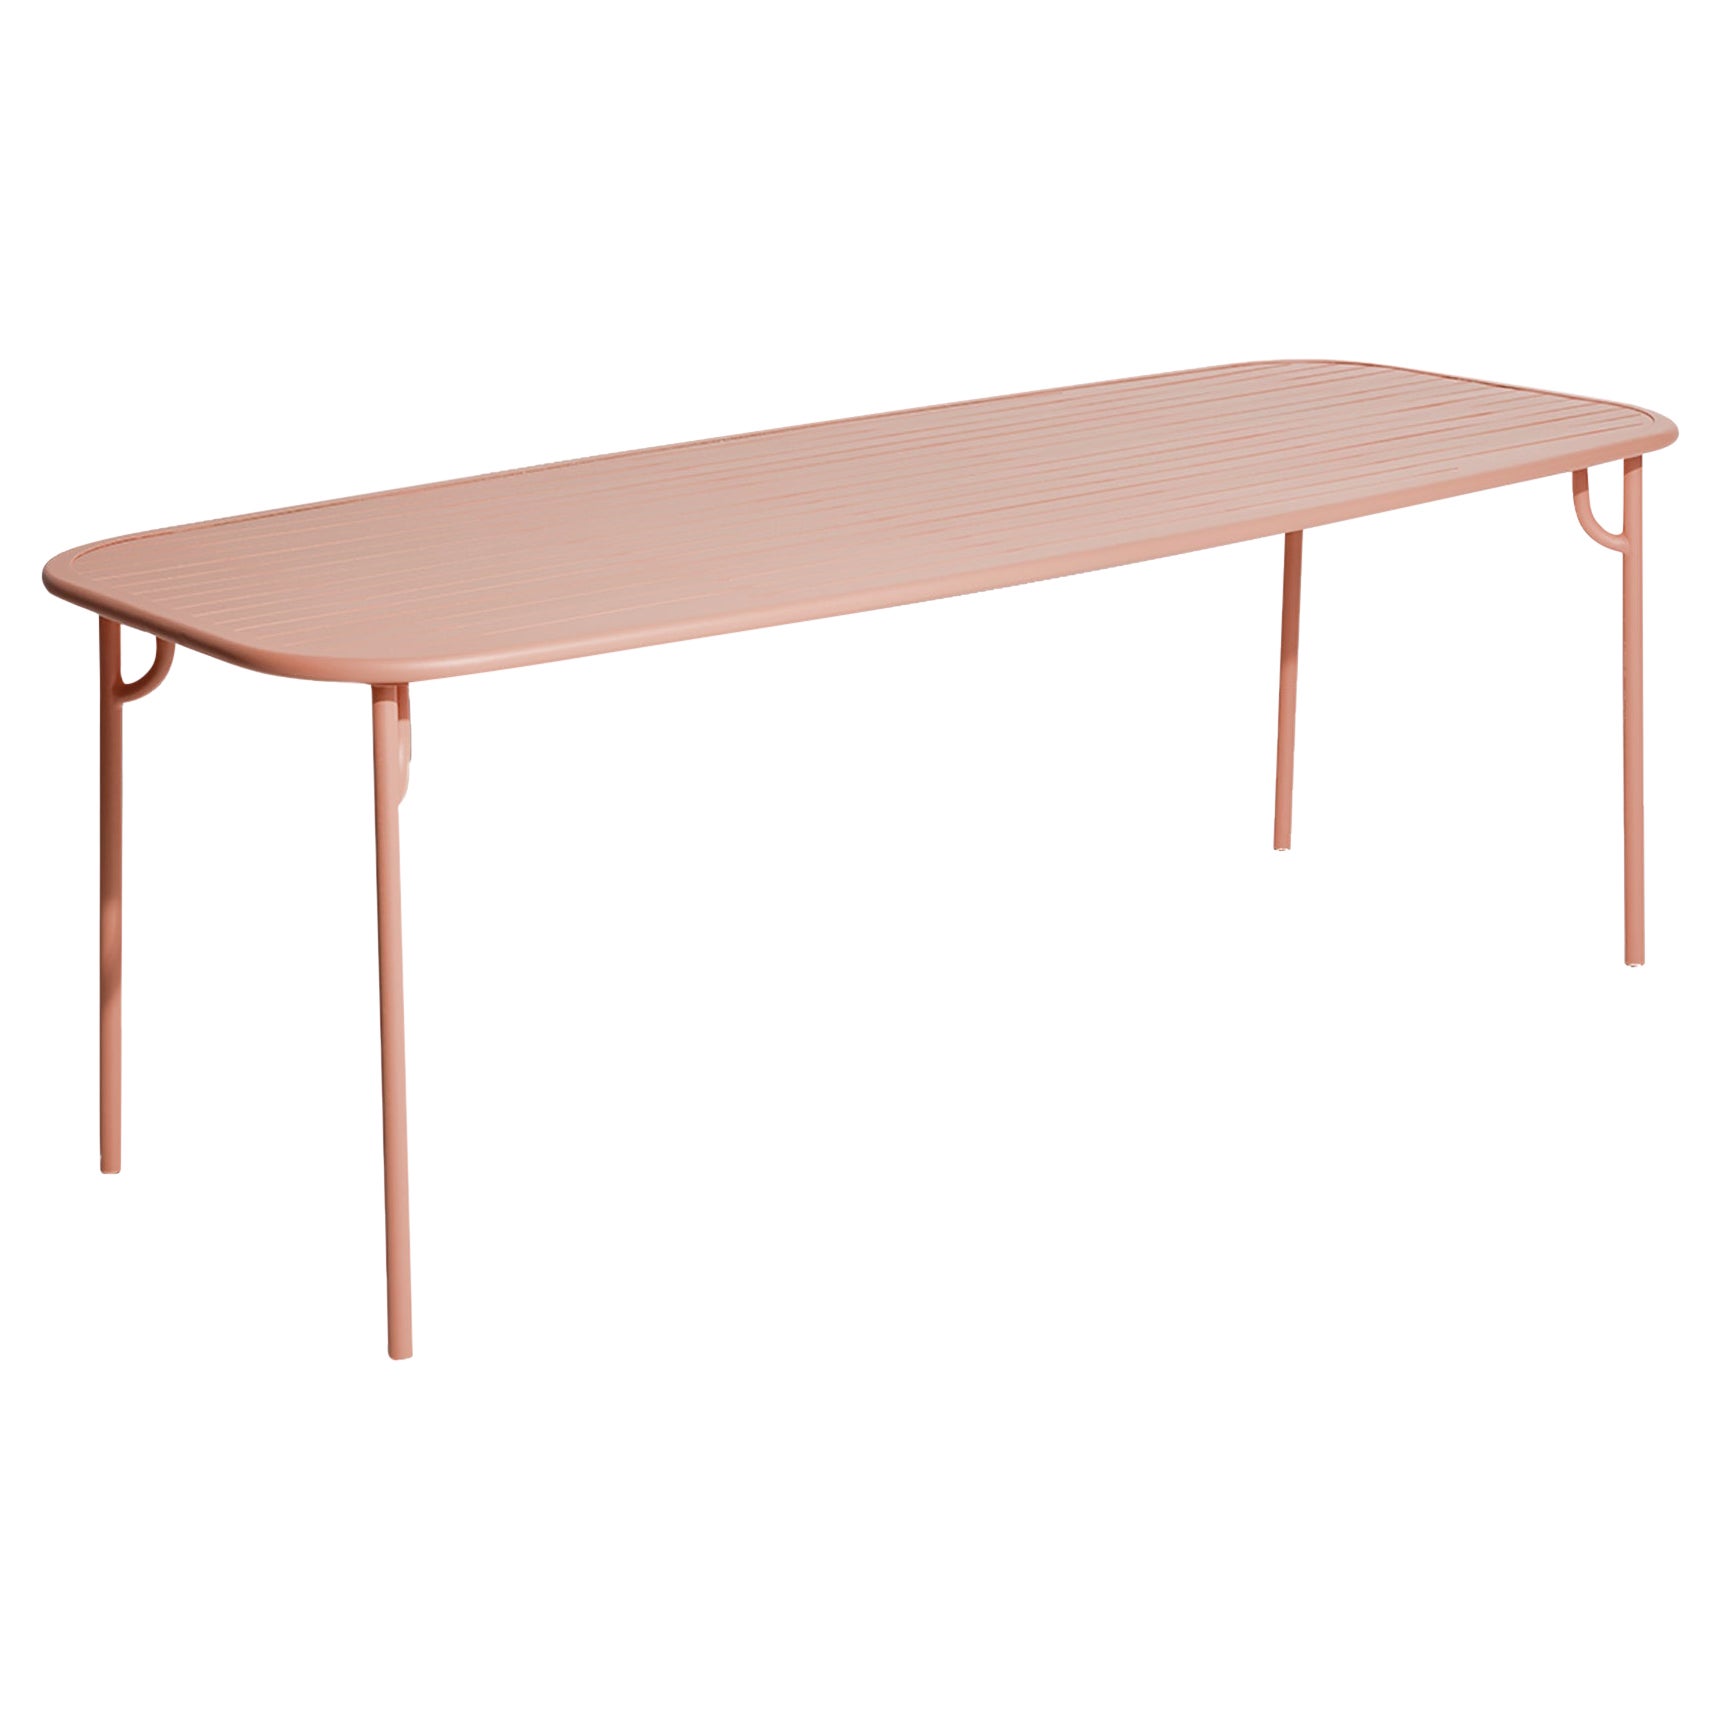 Petite Friture Week-End Large Rectangular Dining Table in Blush with Slats